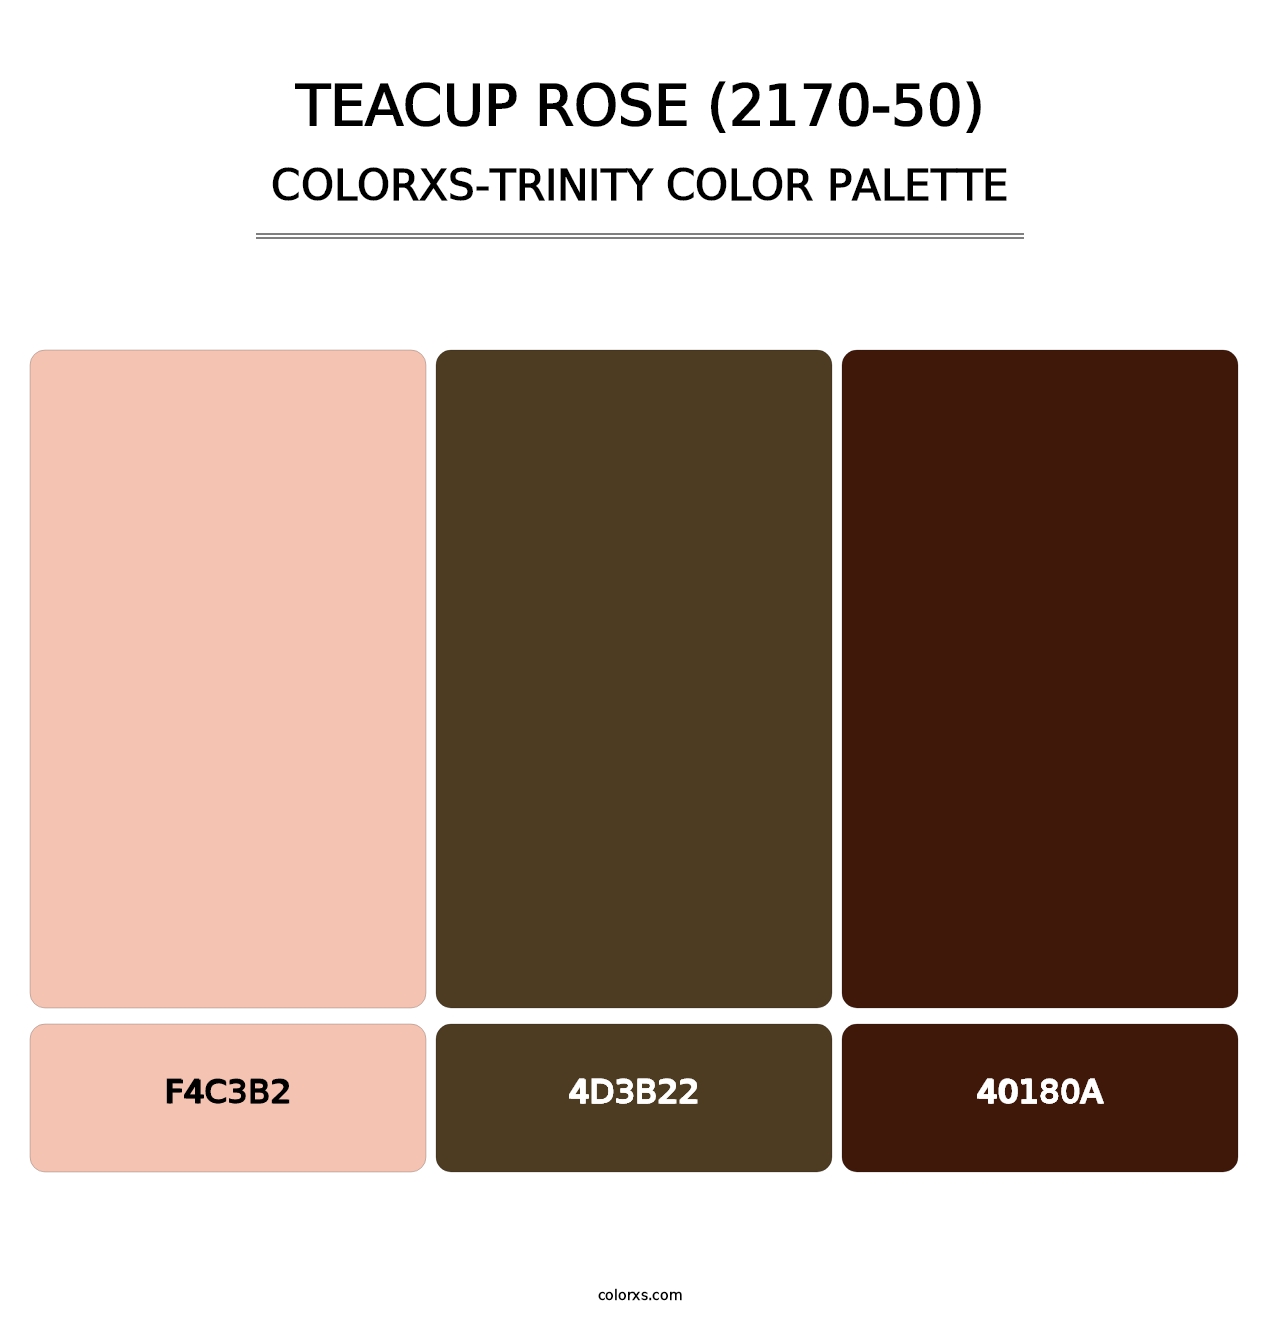 Teacup Rose (2170-50) - Colorxs Trinity Palette